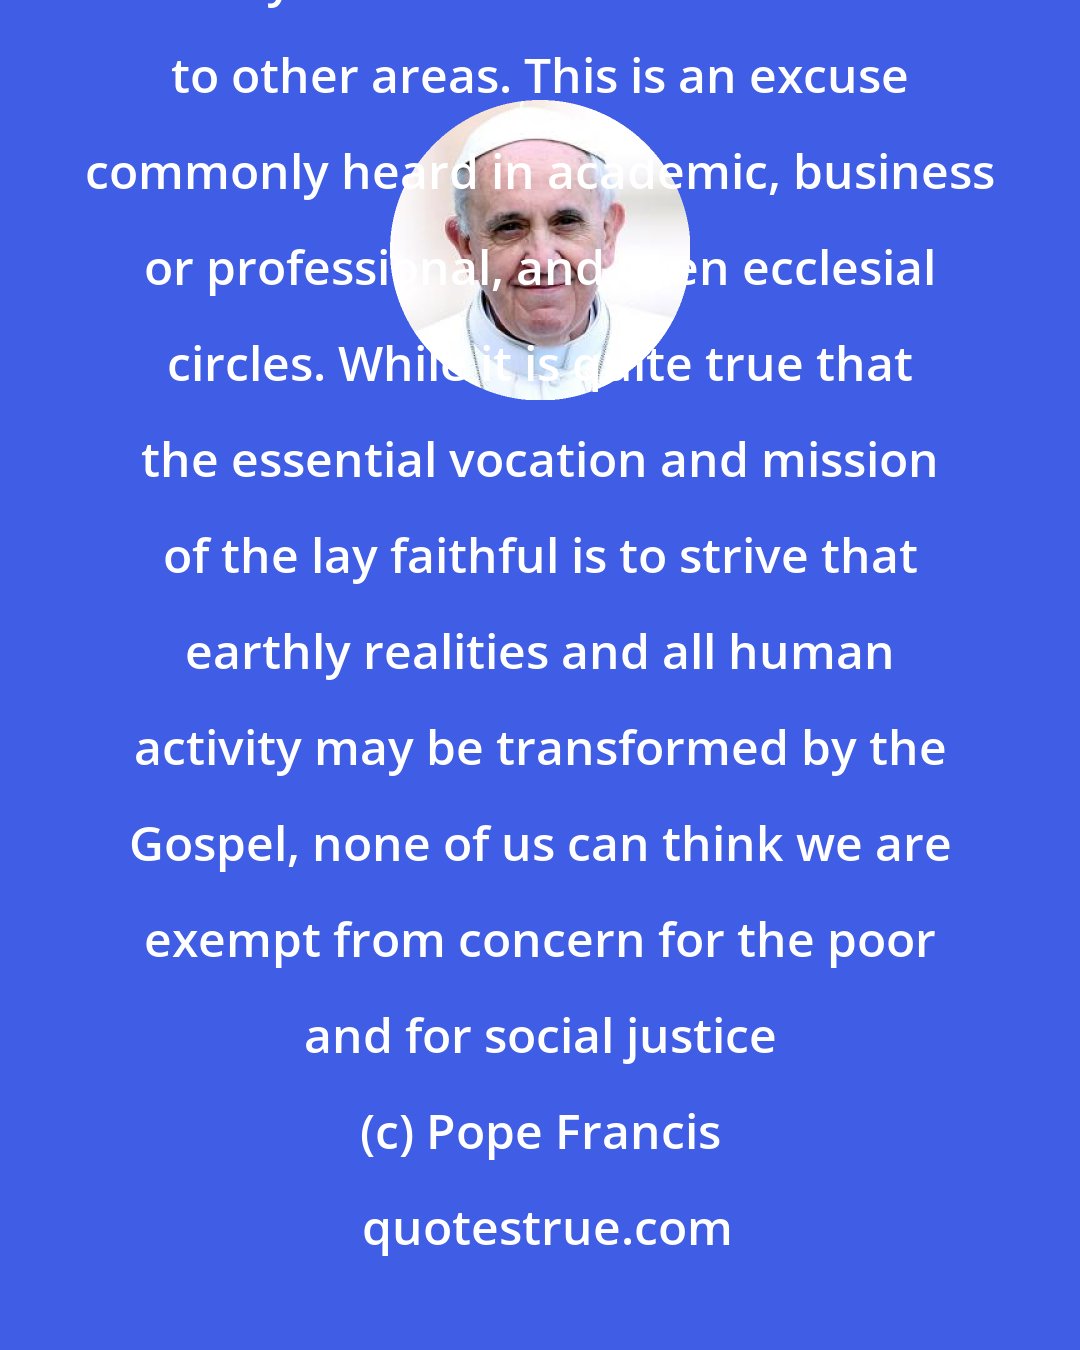 Pope Francis: No one must say that they cannot be close to the poor because their own lifestyle demands more attention to other areas. This is an excuse commonly heard in academic, business or professional, and even ecclesial circles. While it is quite true that the essential vocation and mission of the lay faithful is to strive that earthly realities and all human activity may be transformed by the Gospel, none of us can think we are exempt from concern for the poor and for social justice